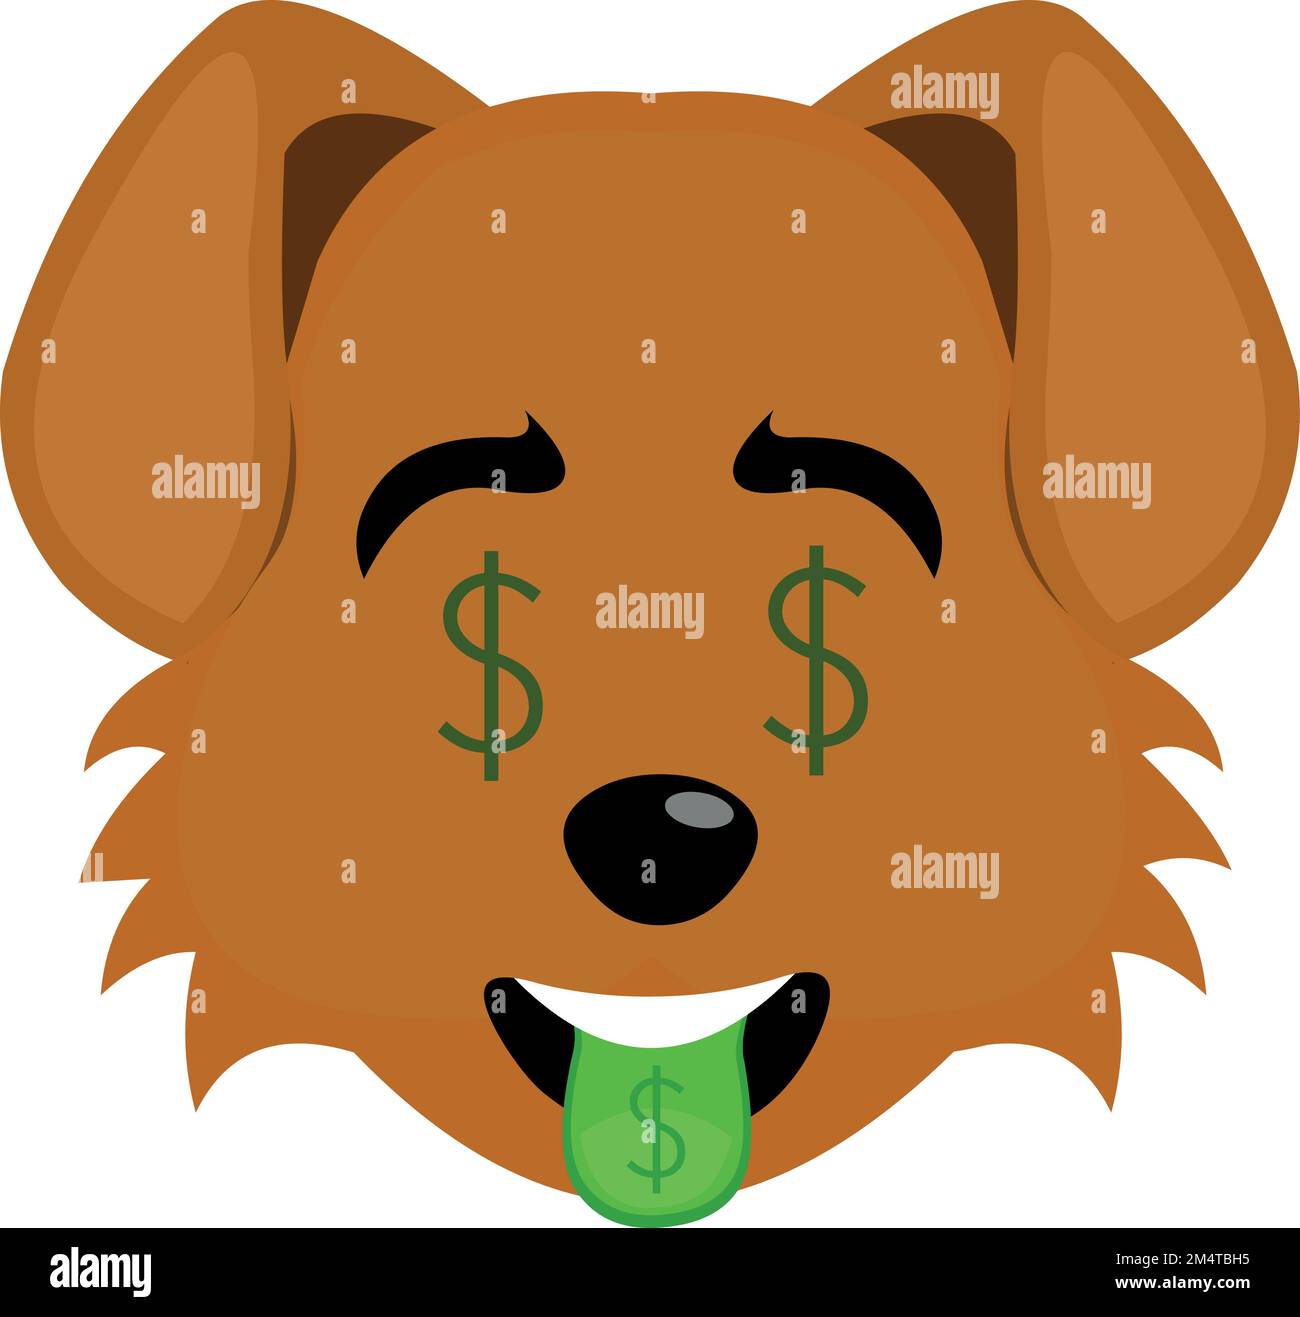 vector illustration of the face of a cartoon dog with the symbol dolar in the eyes and tongue Stock Vector